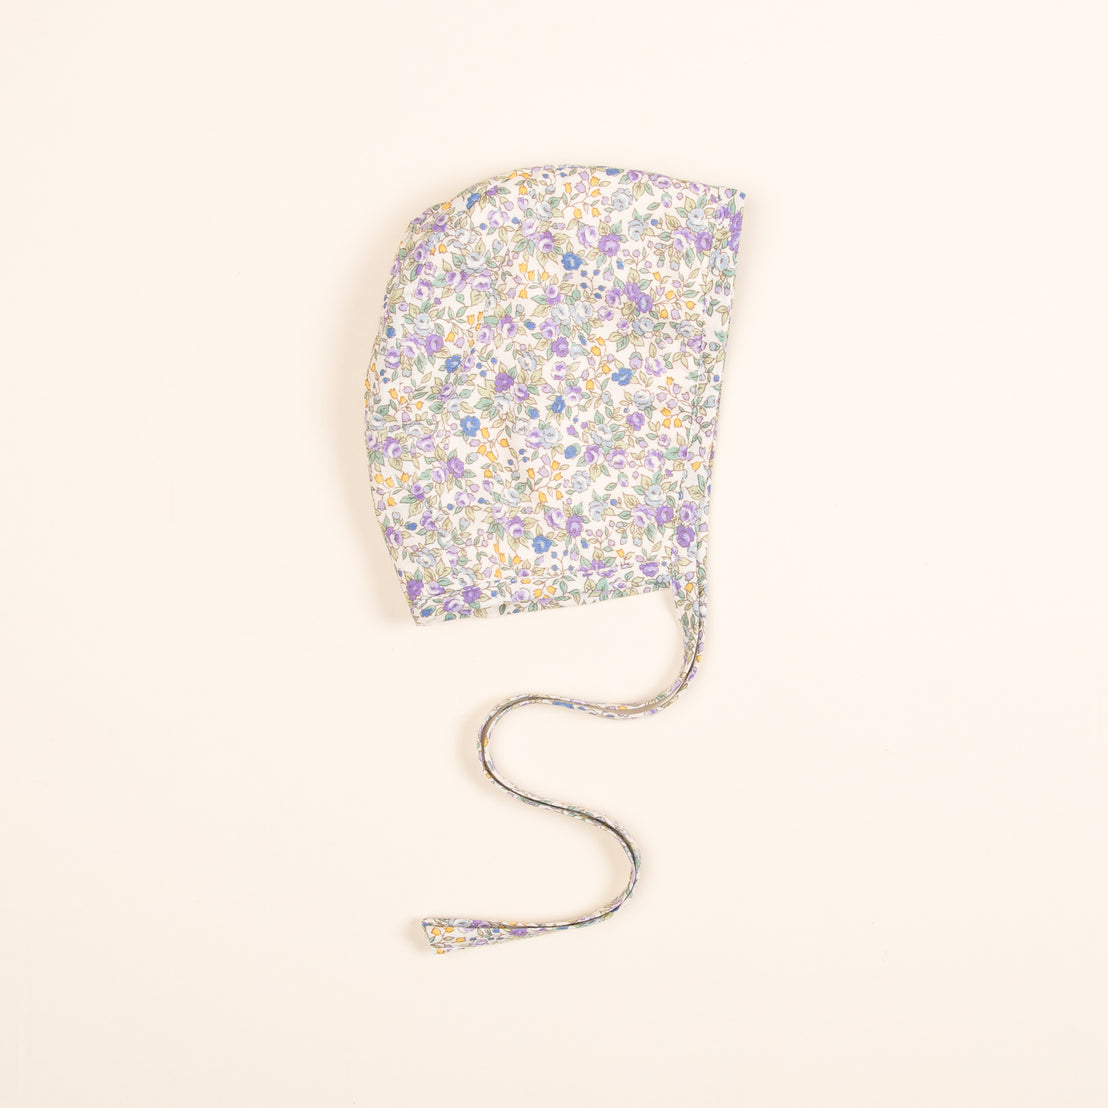 A Petite Fleur Bonnet, floral print fabric shower cap with an extended string, laid flat on a light beige background.